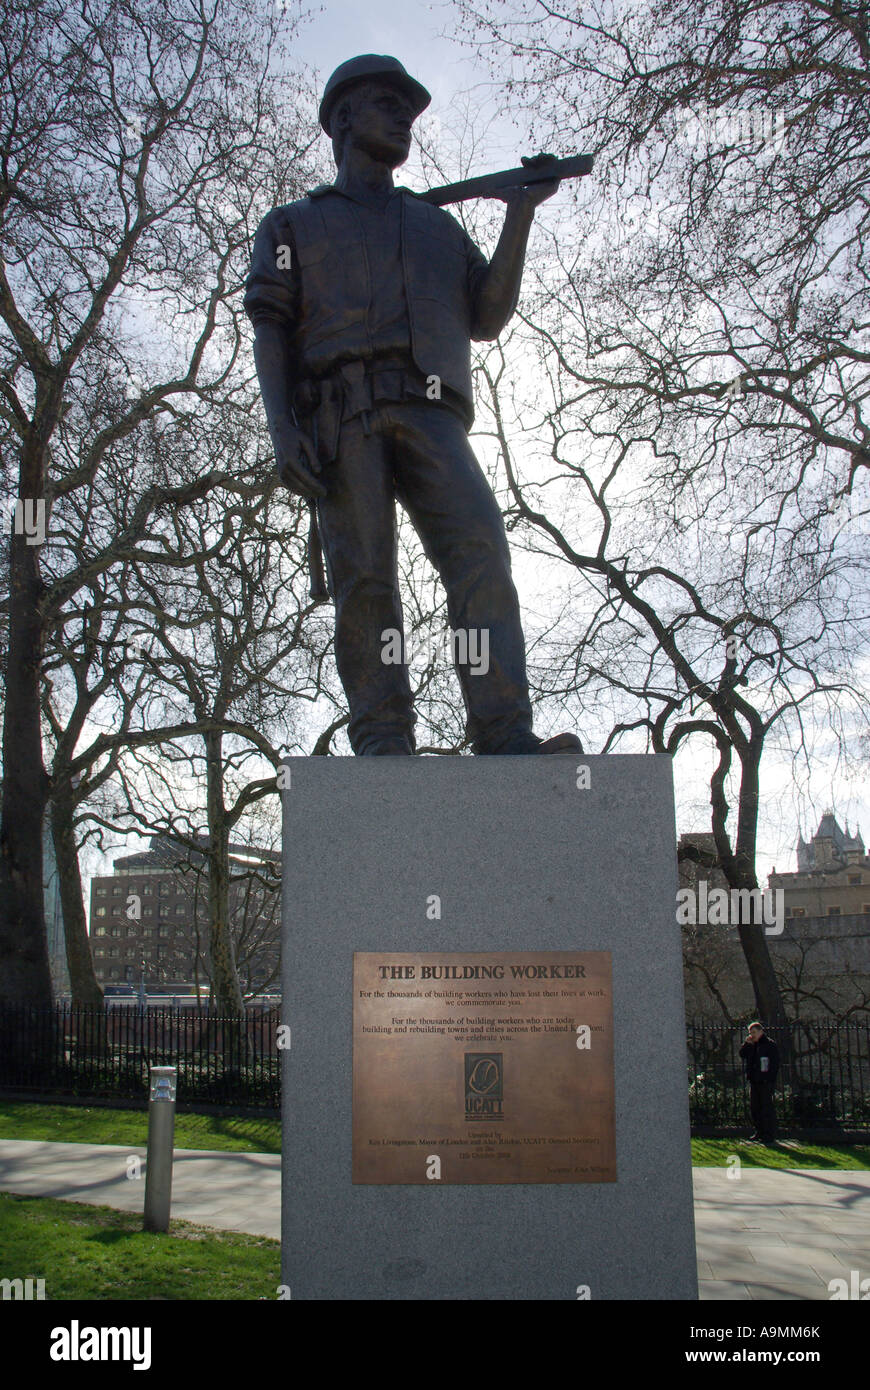 The Building Worker statue commemorating lives of workers who have died on building construction sites Tower Hill London UK sculpture by Alan Wilson Stock Photo